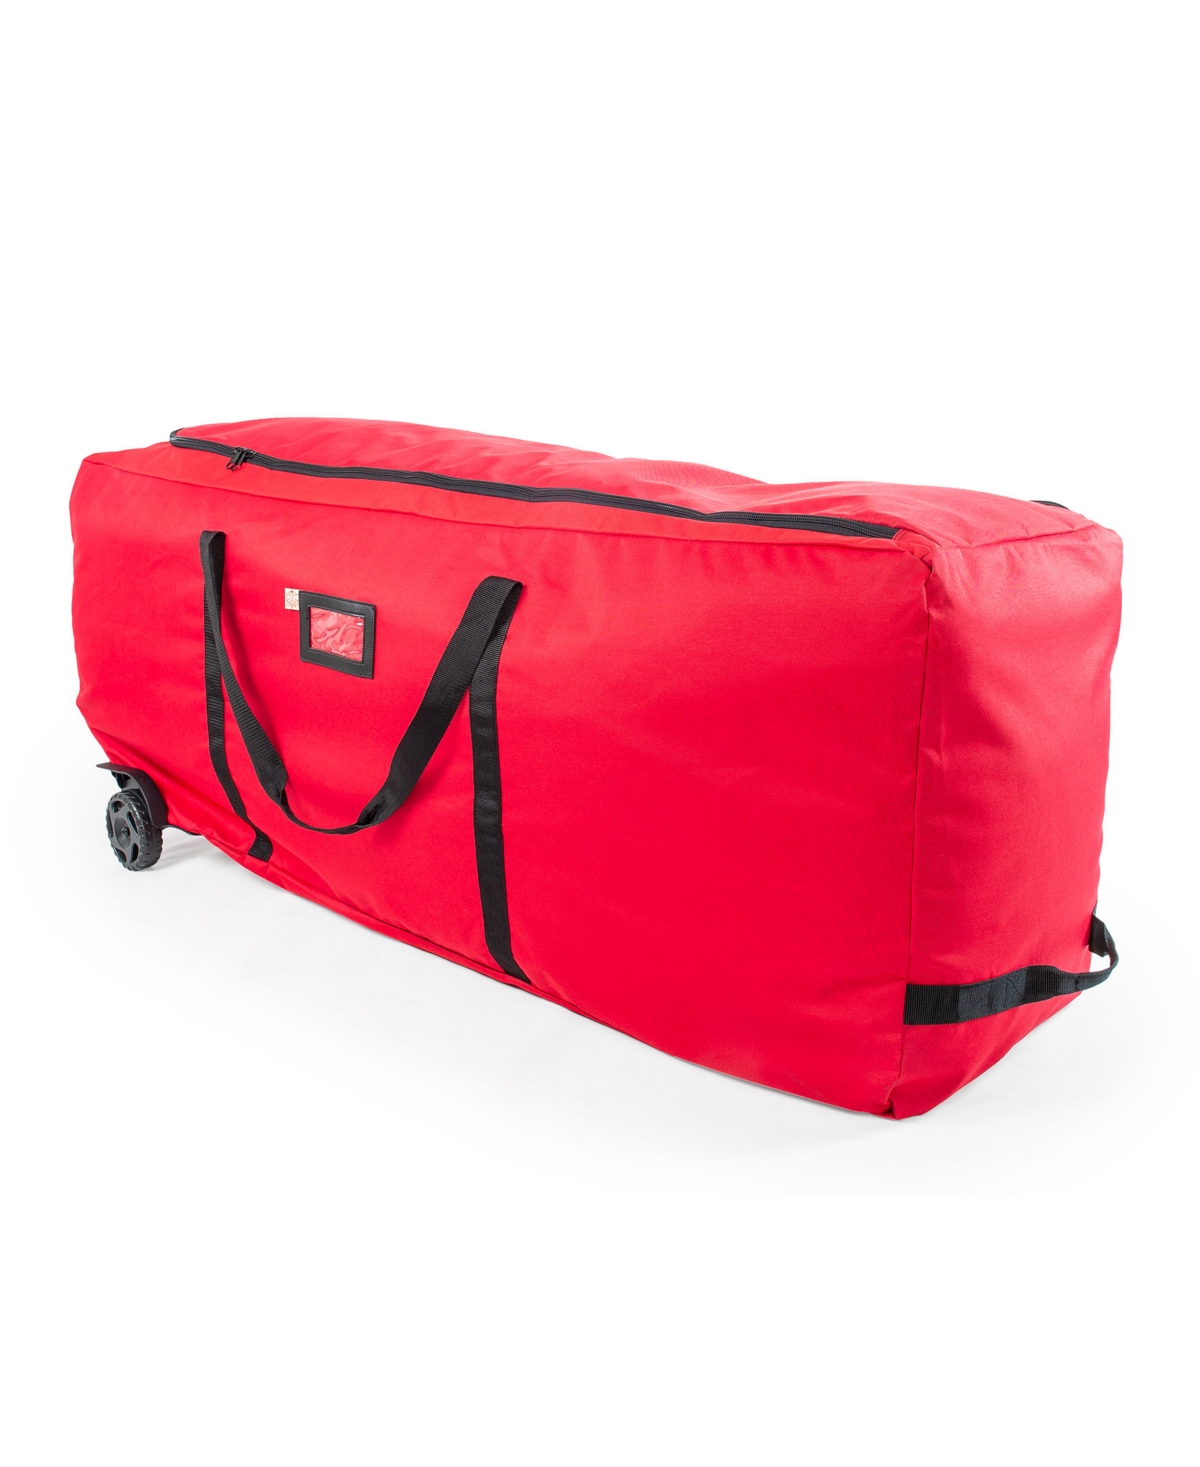 Ez Roller 9' Artificial Christmas Tree Storage Bag with Wheels - Red